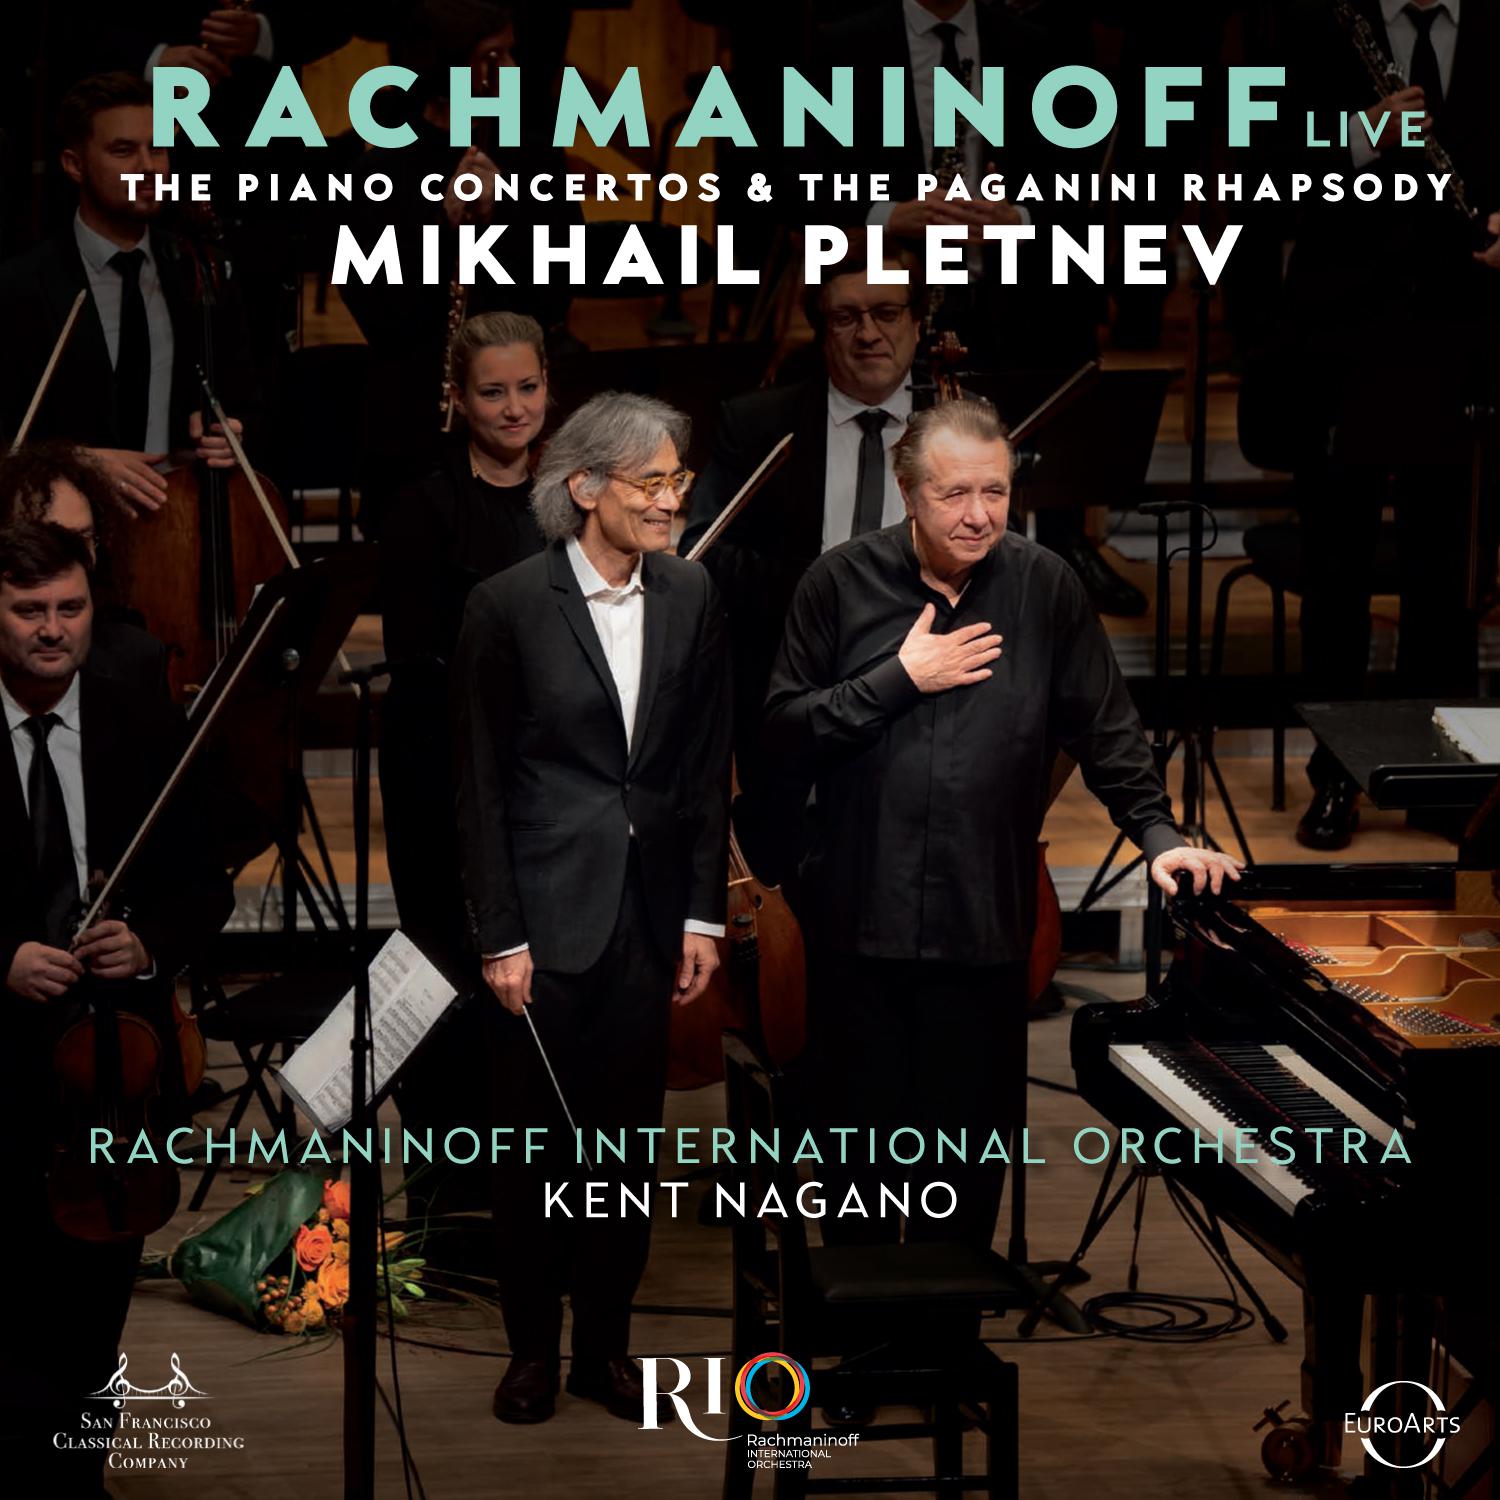 Rachmaninoff International Orchestra - Rhapsody on a Theme of Paganini, Op. 43:Var. 10. L’istesso tempo (Live)